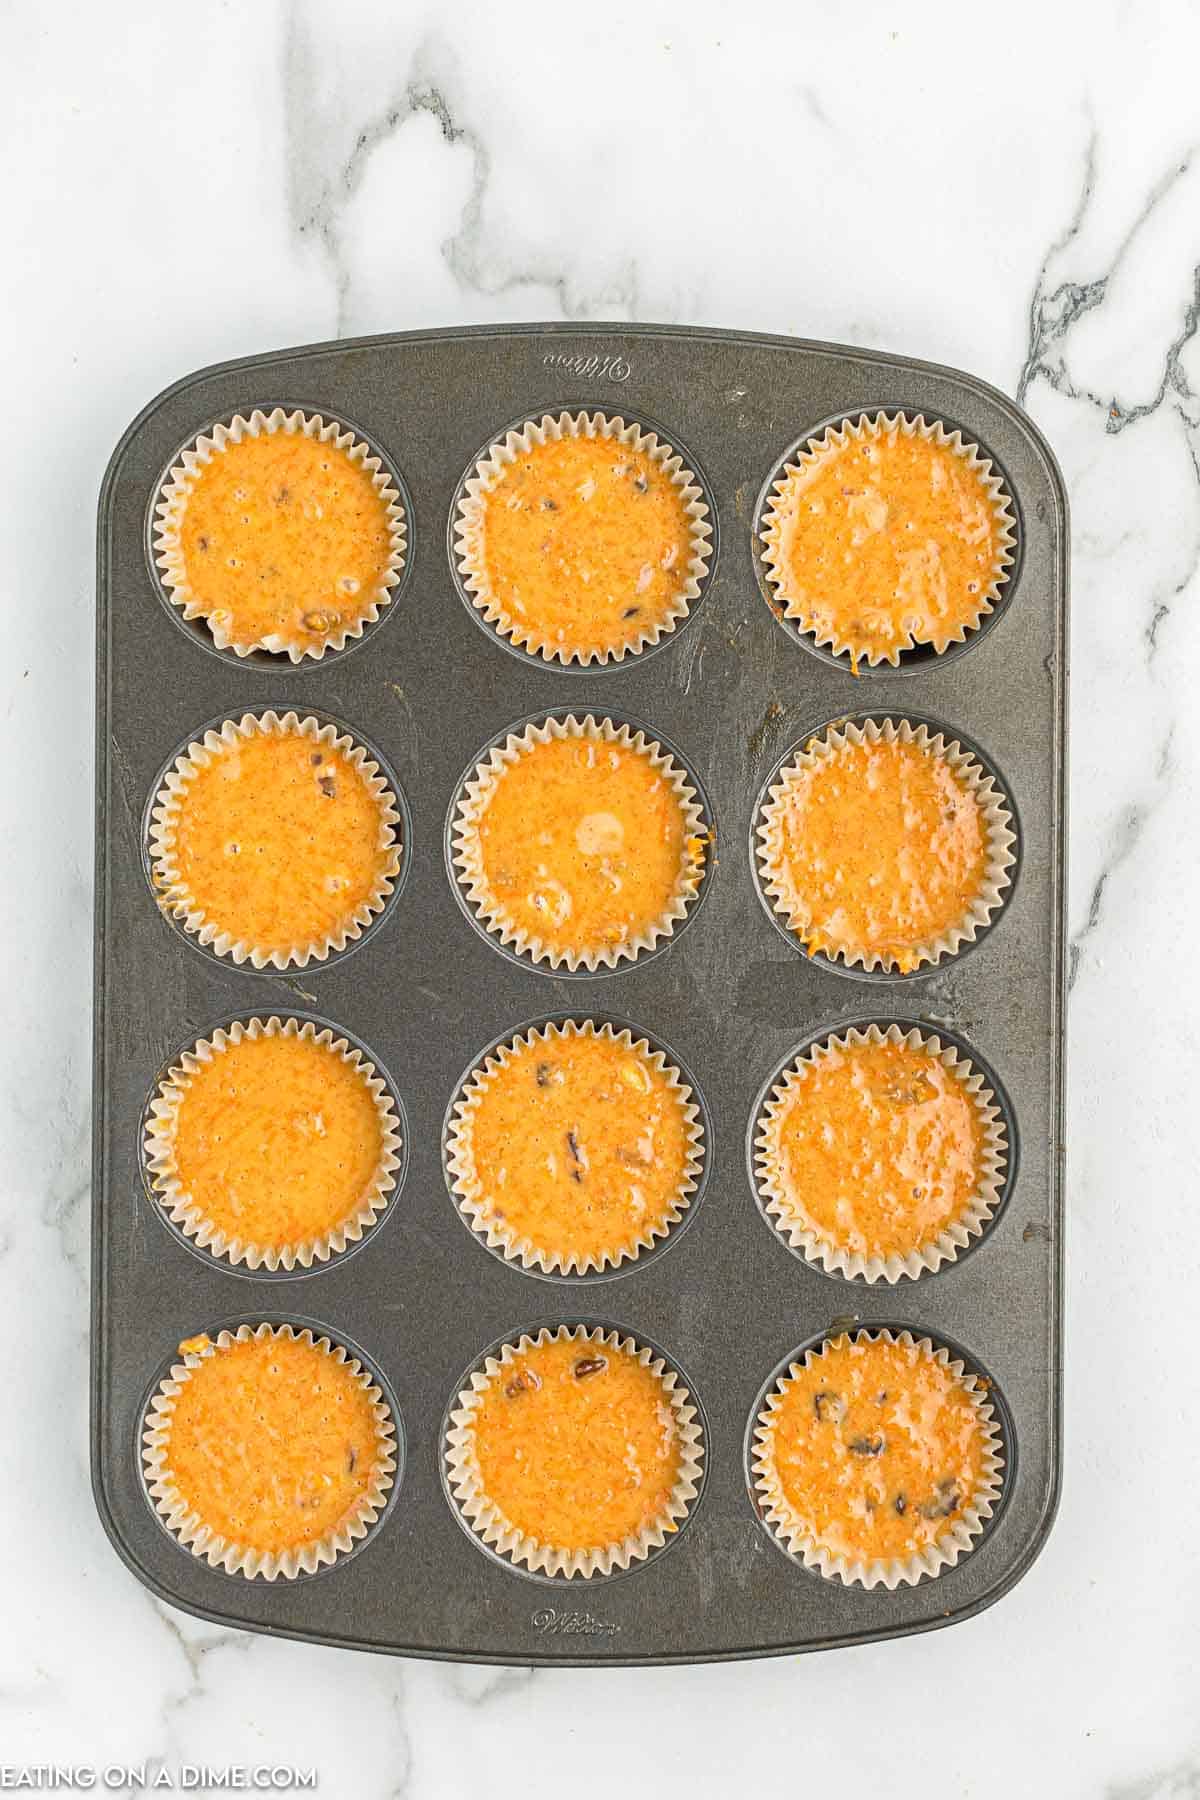 Pour the cupcake batter in muffin tin